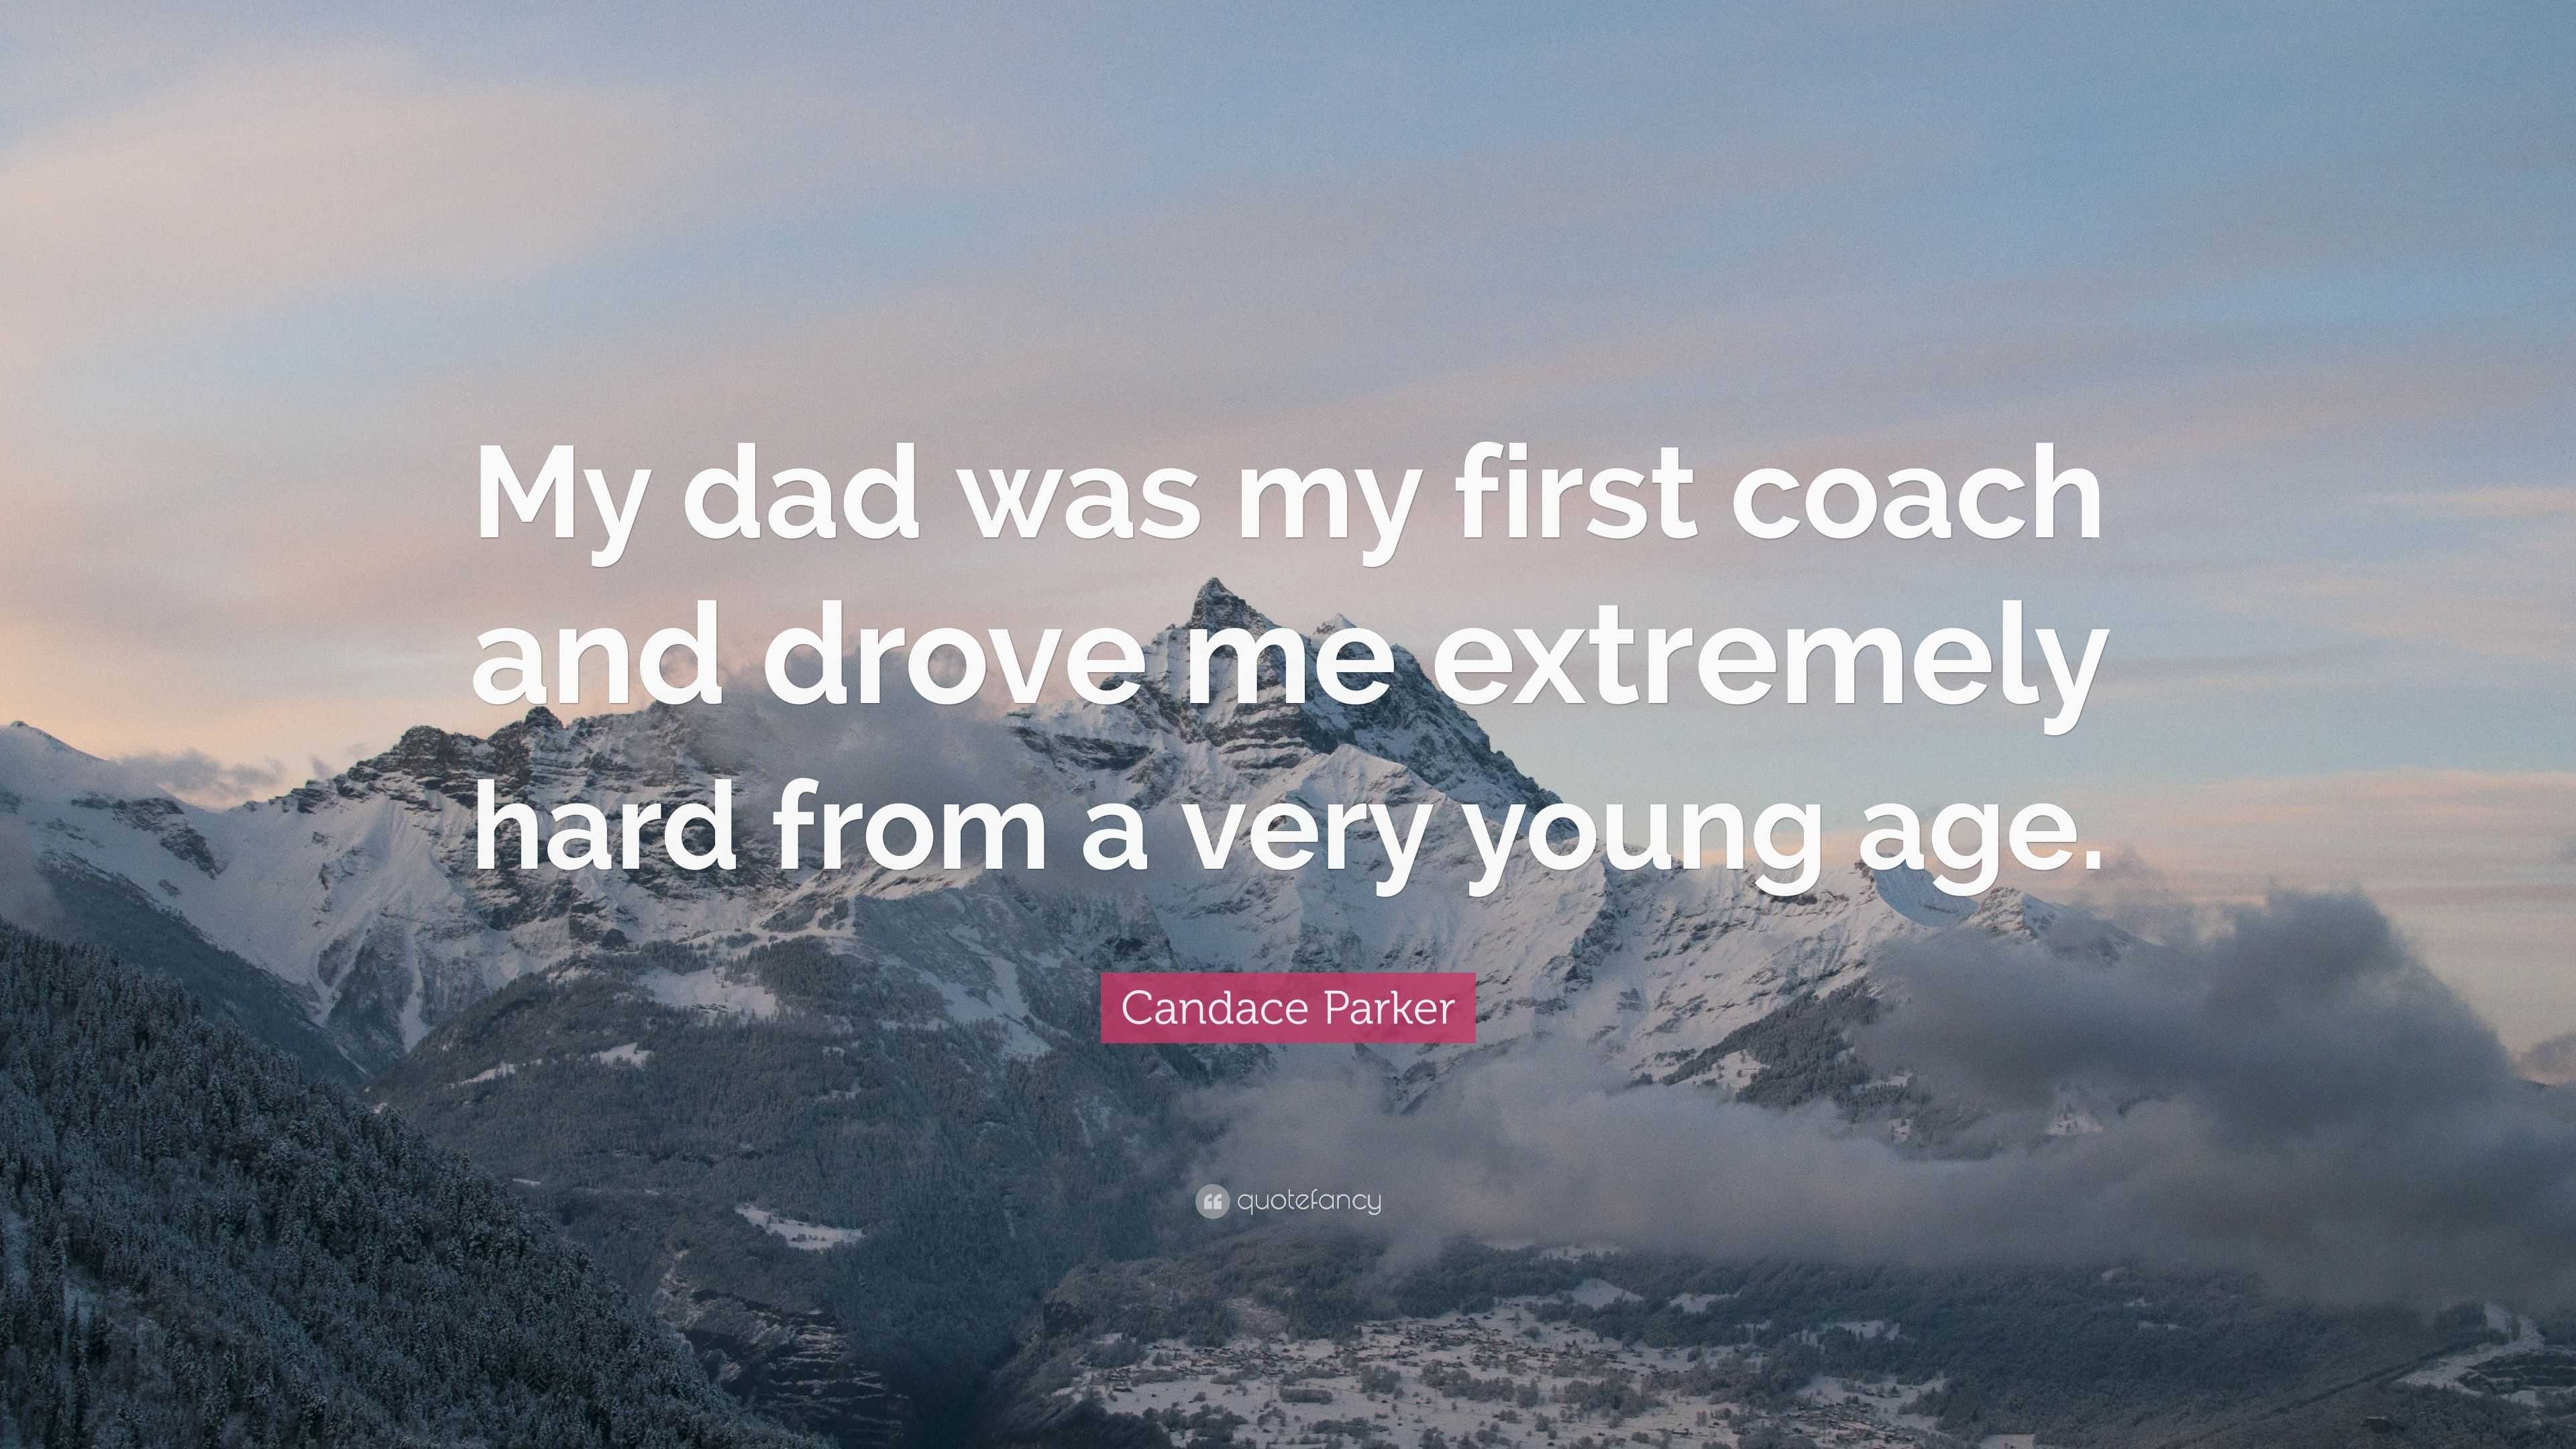 Candace Parker Quote: “My dad was my first coach and drove me extremely  hard from a